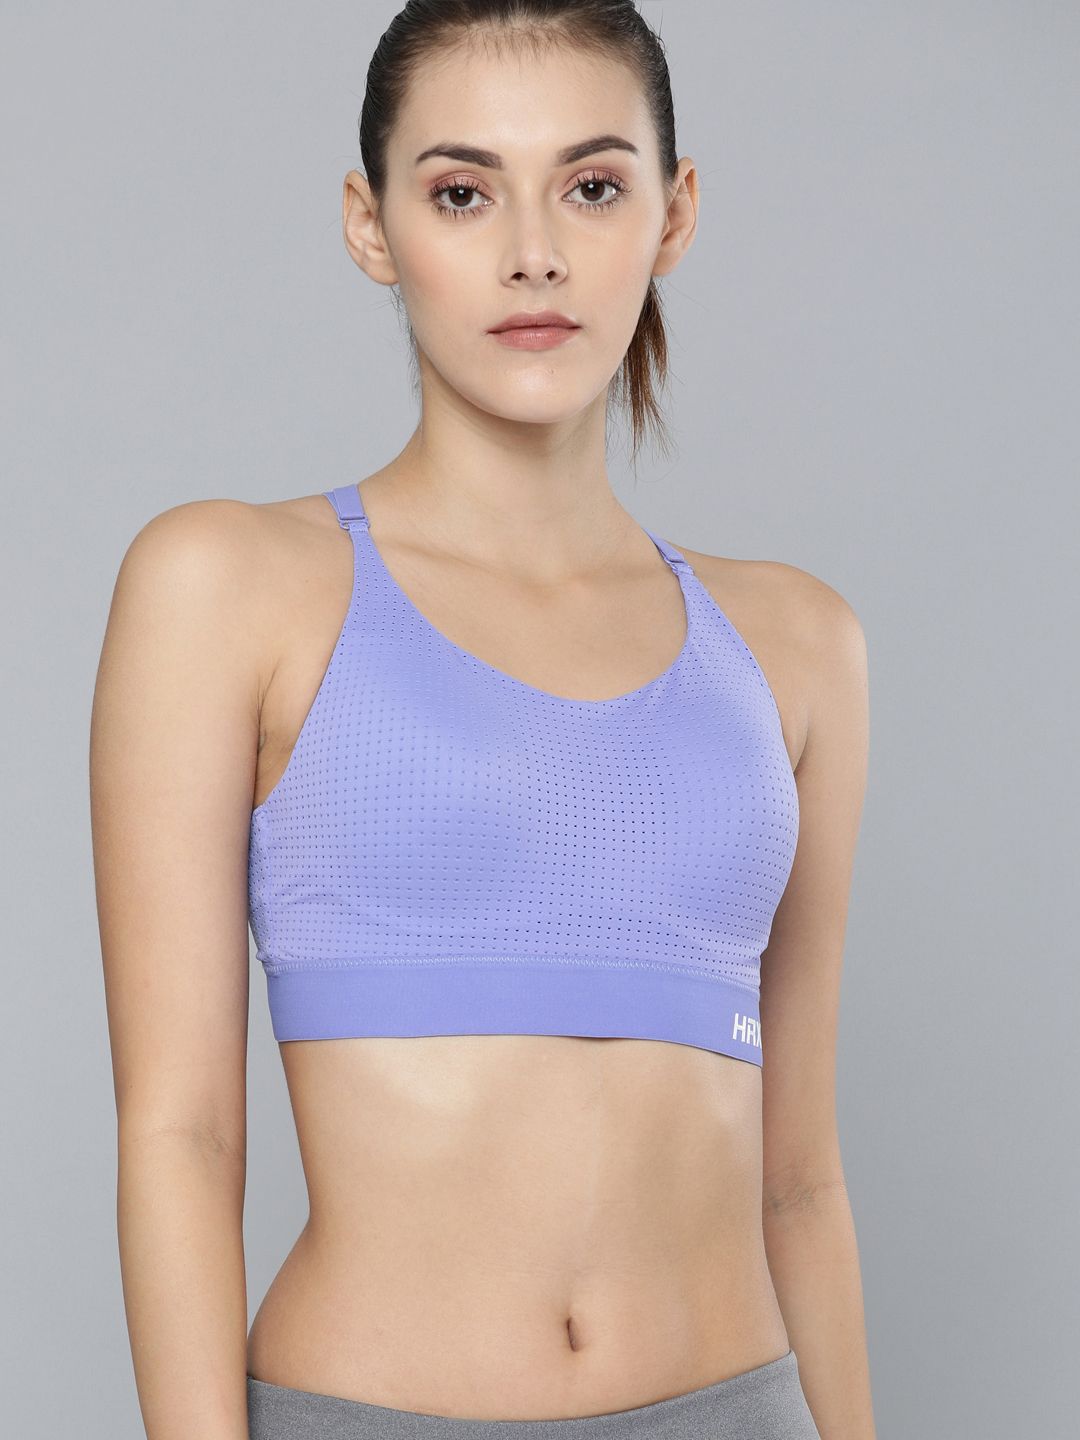 HDC TECHNOLOGY PRIVATE LIMITED  HRX Colourblocked Full Coverage Rapid-Dry  Training Bra